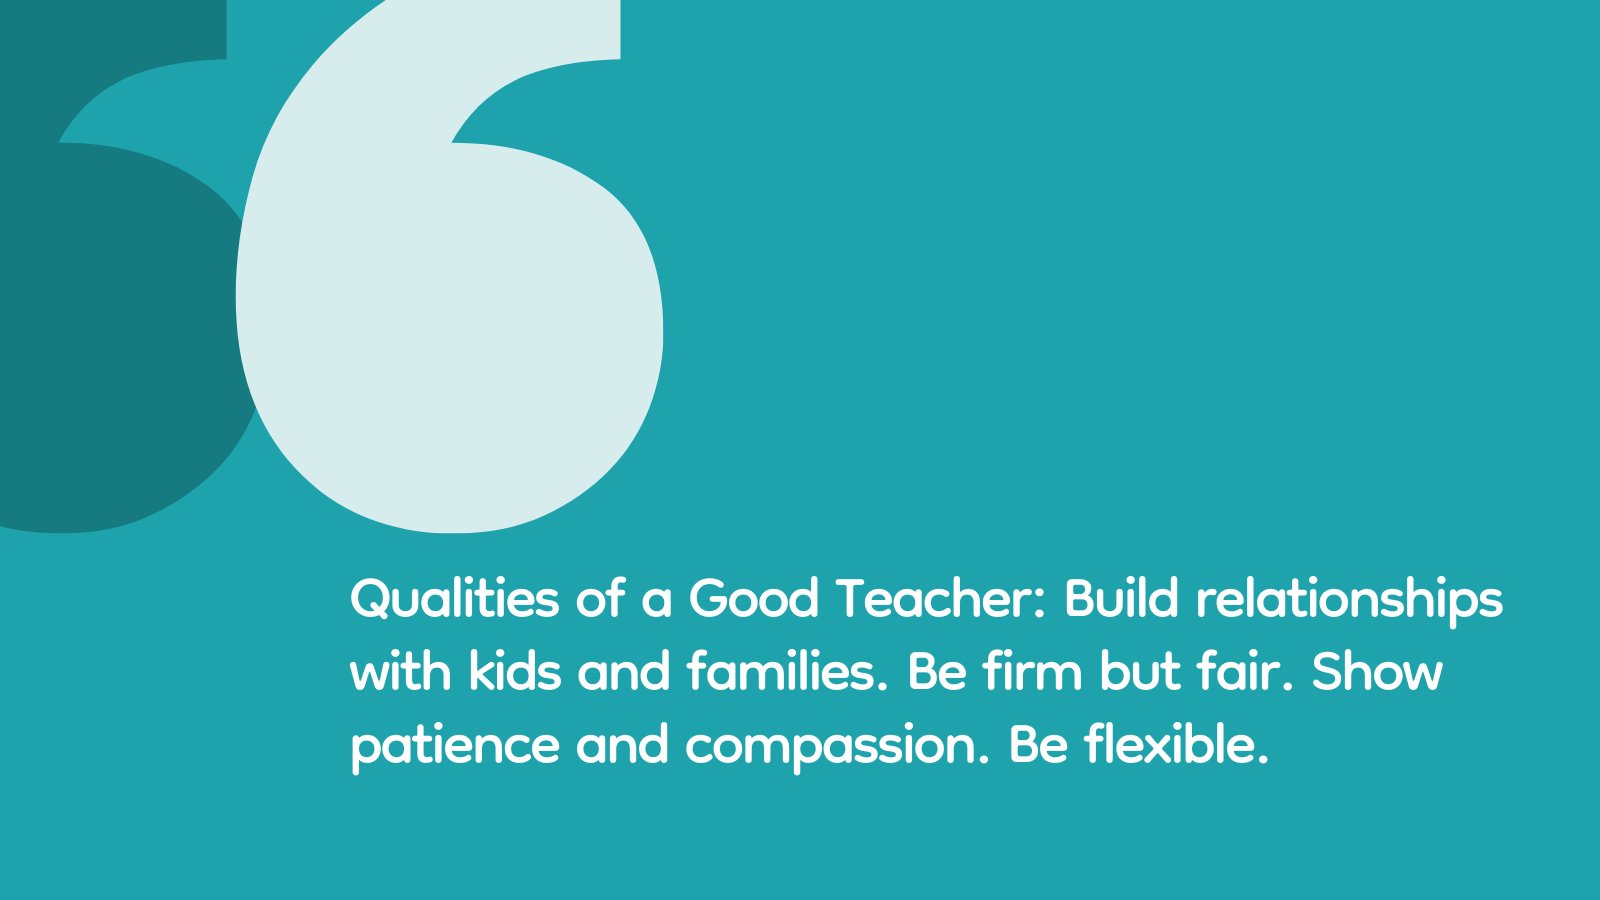 Qualities of a Good Teacher: Build relationships with kids and families. Be firm but fair. Show patience and compassion. Be flexible.